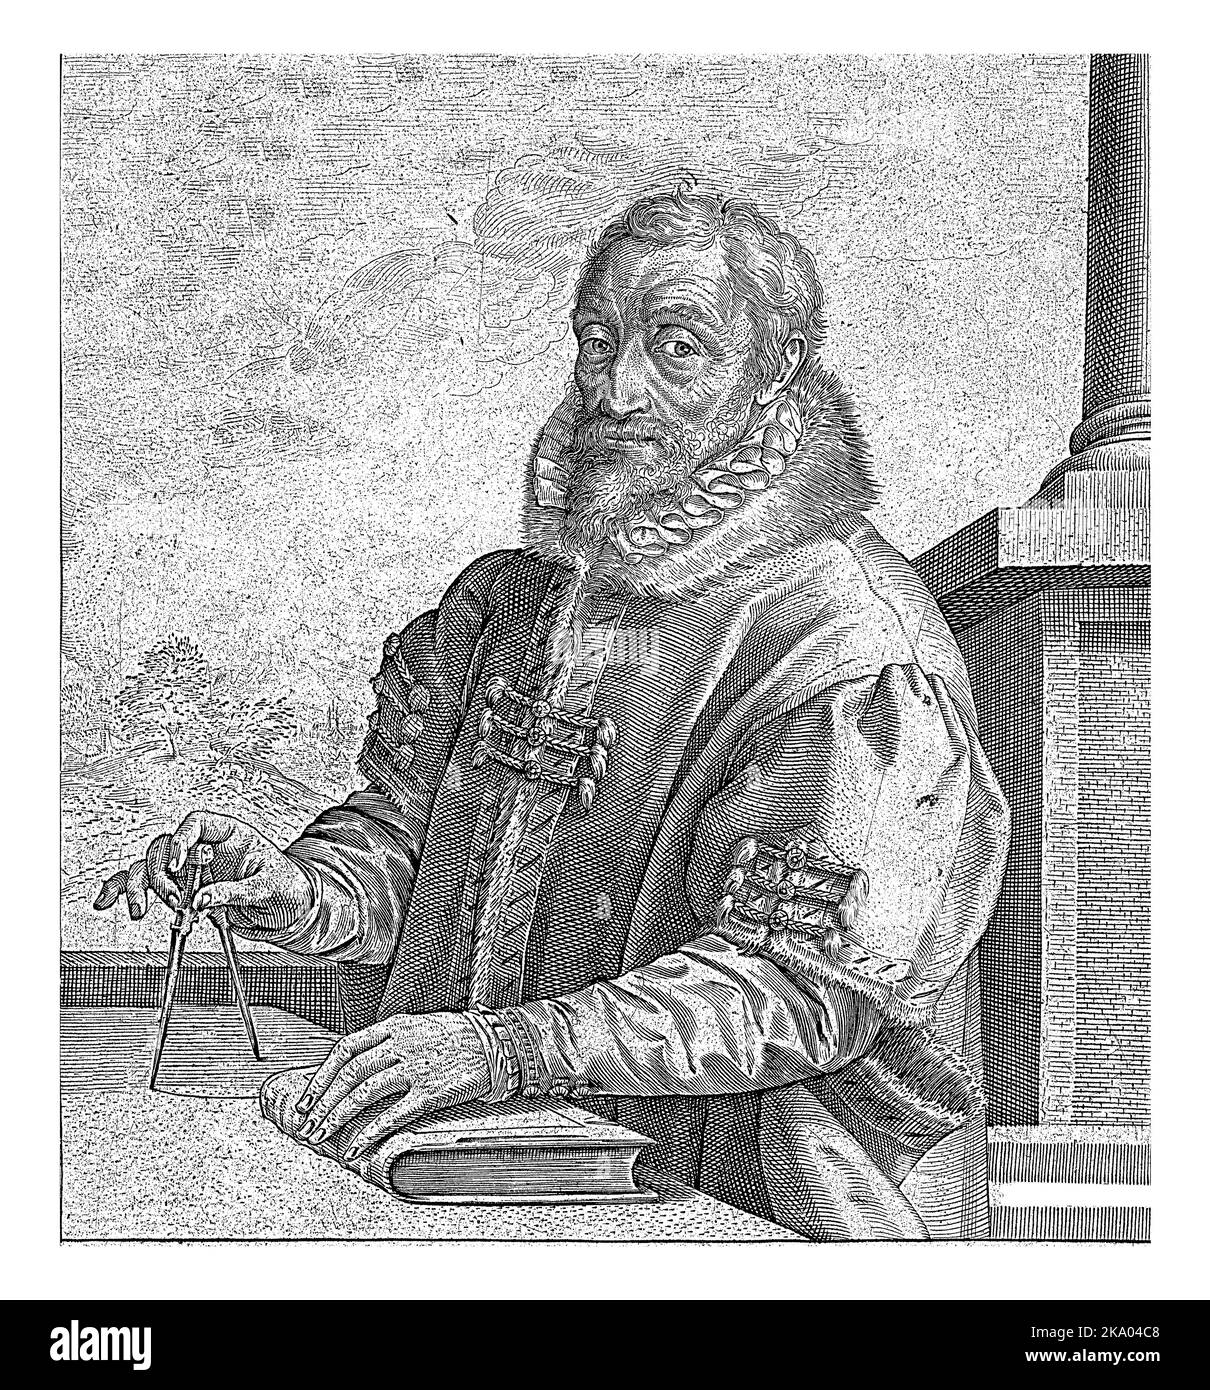 Portrait of the printer/publisher Christoffel Plantin, half-length, seen on the left, standing behind a table. Stock Photo